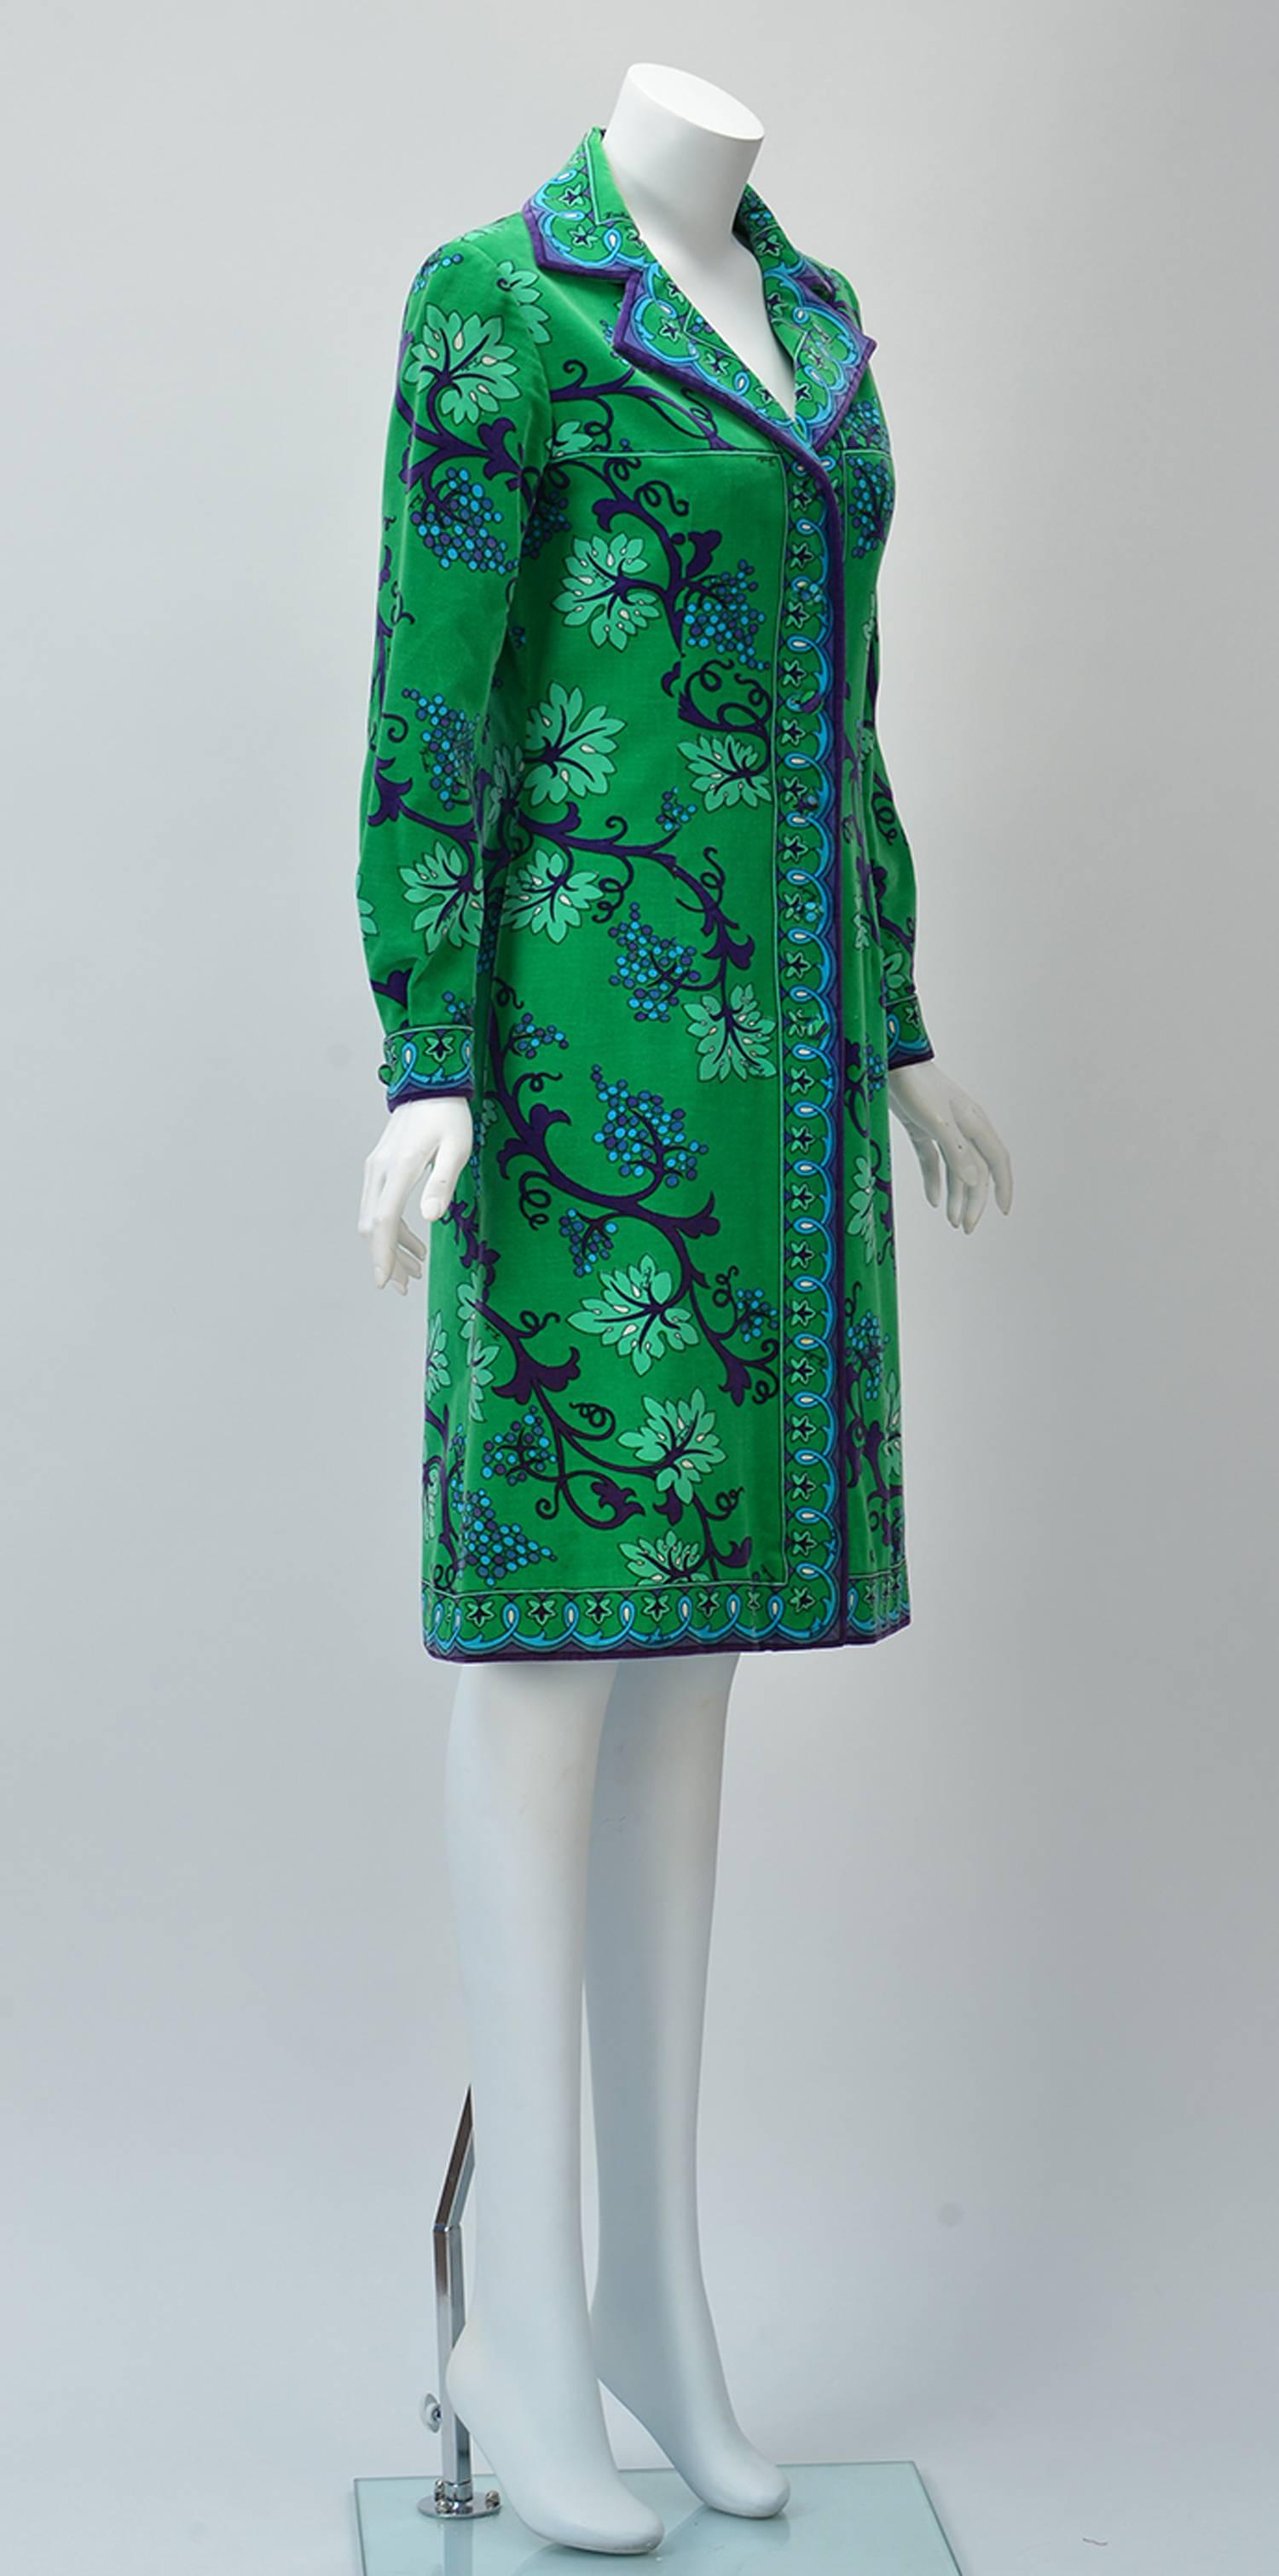 1960's Emilio Pucci green, blue and purple, grape vine print velvet dress. This vintage Emilio Pucci velvet dress is an amazing, yet wearable piece of fashion history. The dress has a green background with stylized grapes in shades of blue and